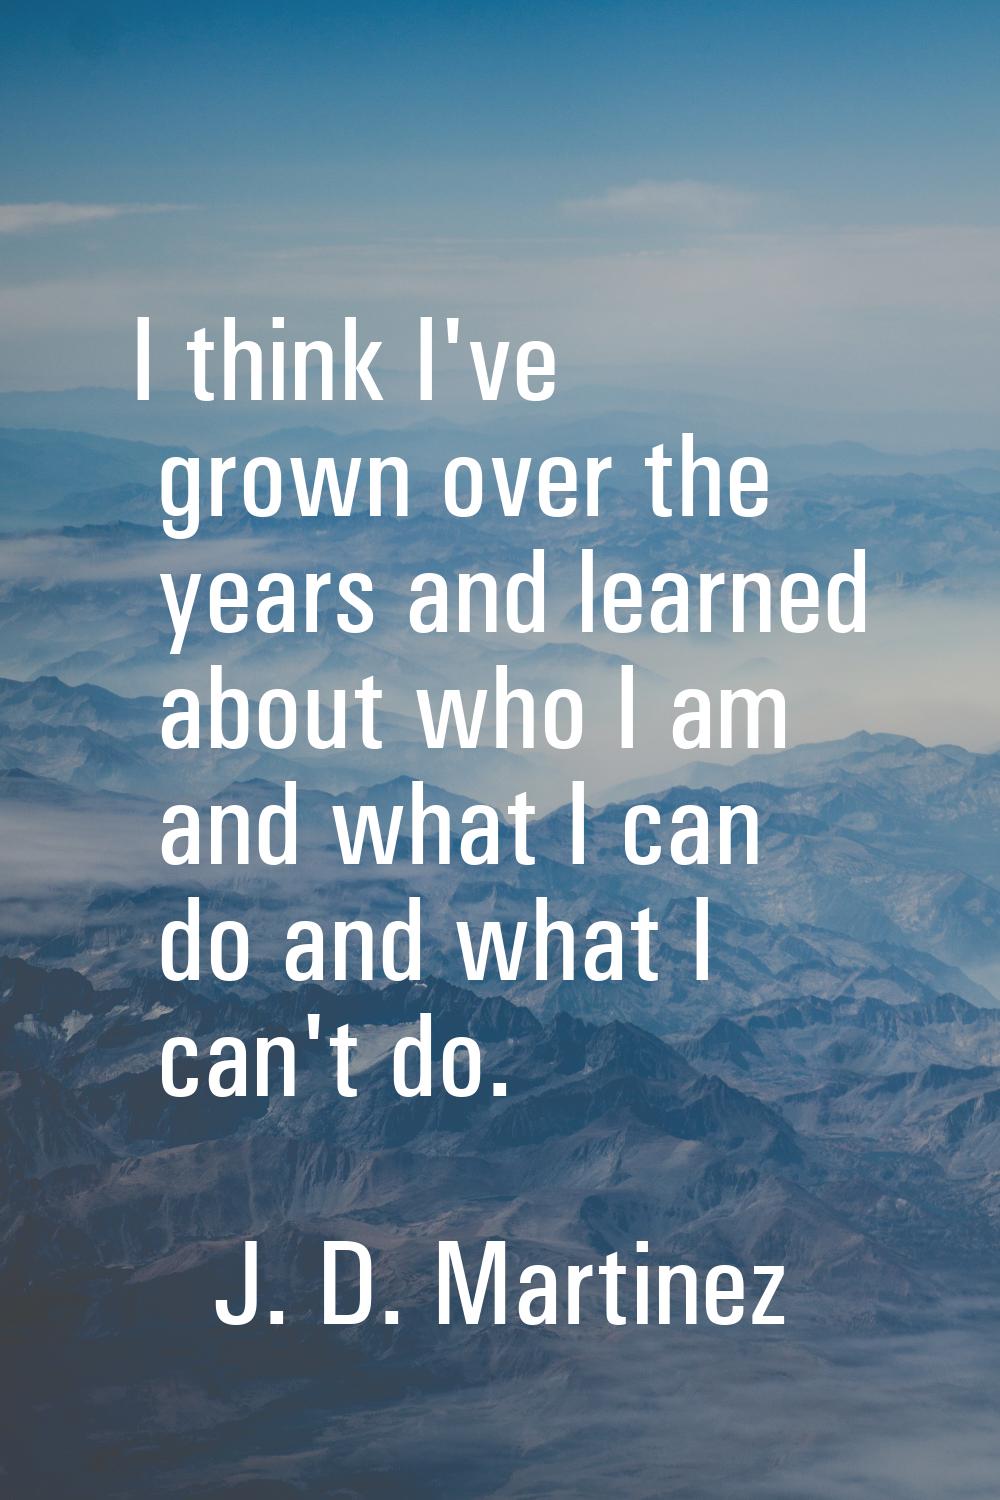 I think I've grown over the years and learned about who I am and what I can do and what I can't do.